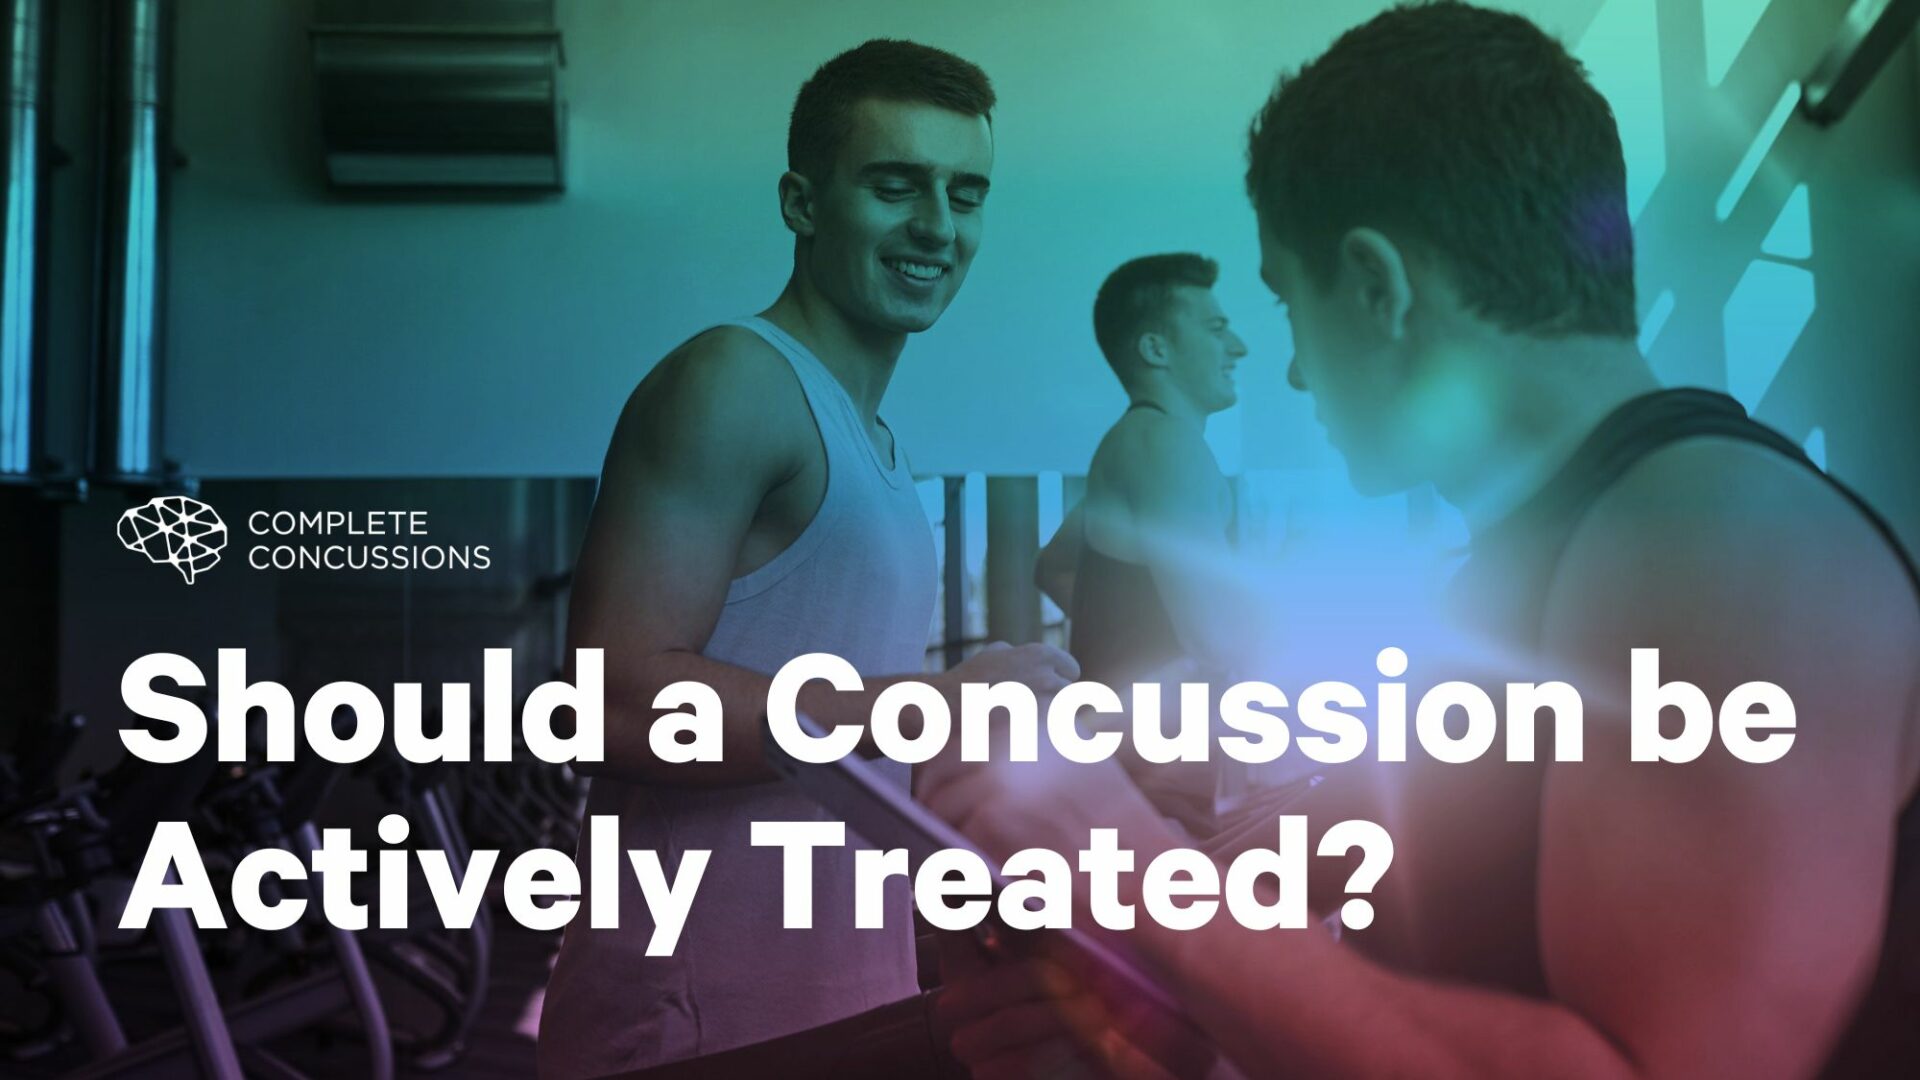 Should a Concussion be Actively Treated?